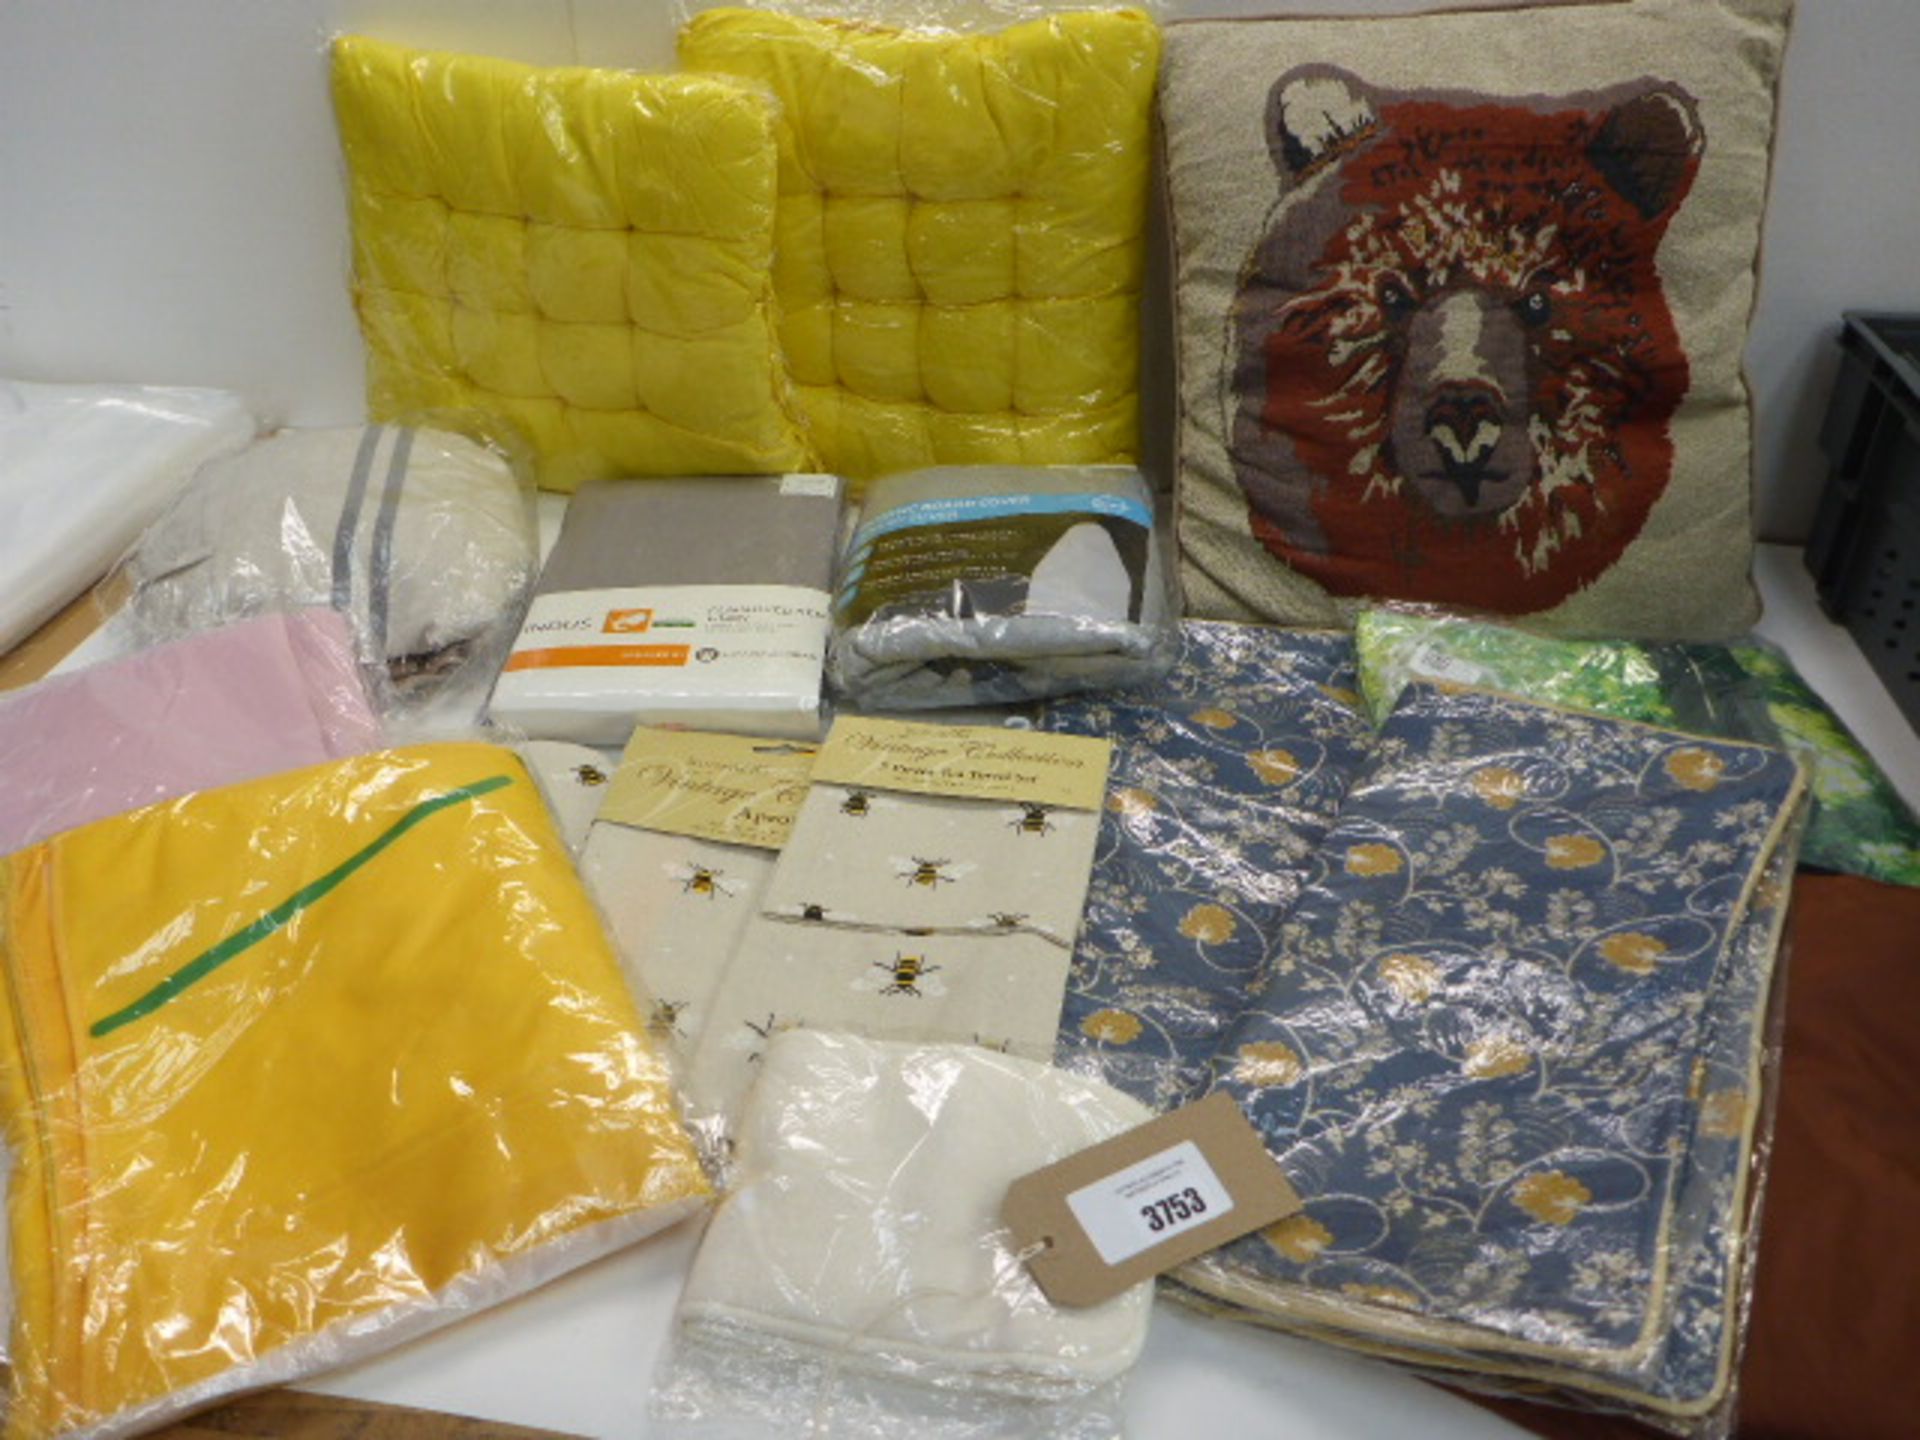 Cushions, bedding, cushion covers, tea towels, oven gloves, ironing board cover etc